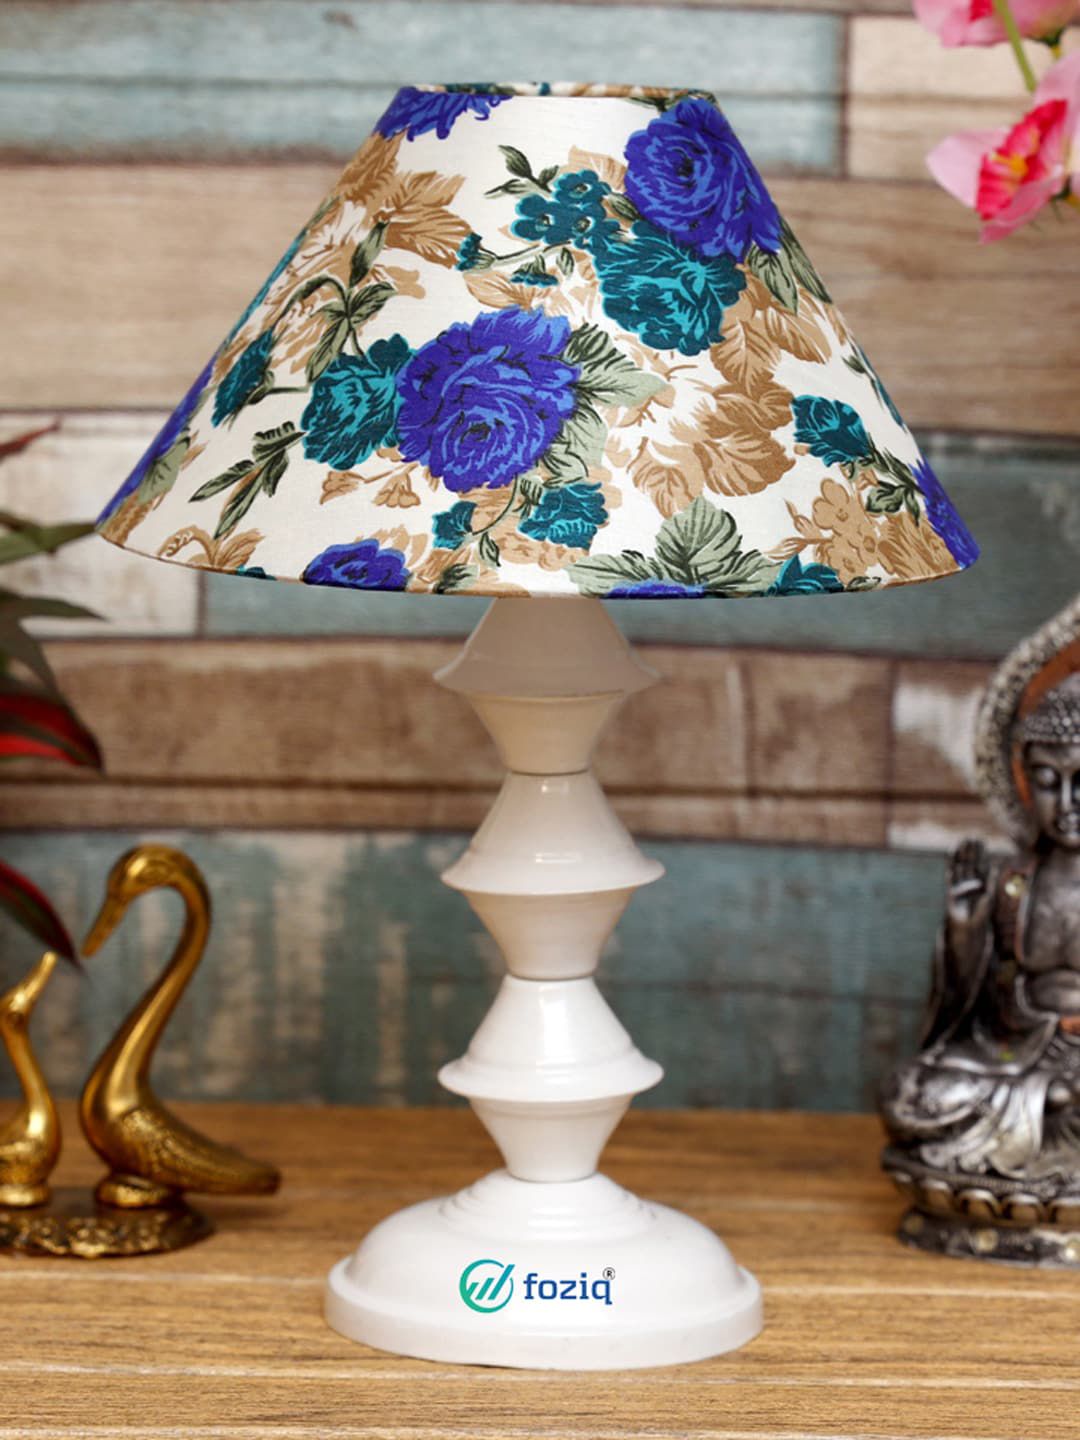 foziq White & Blue Printed Metal Bell Table Lamps Price in India